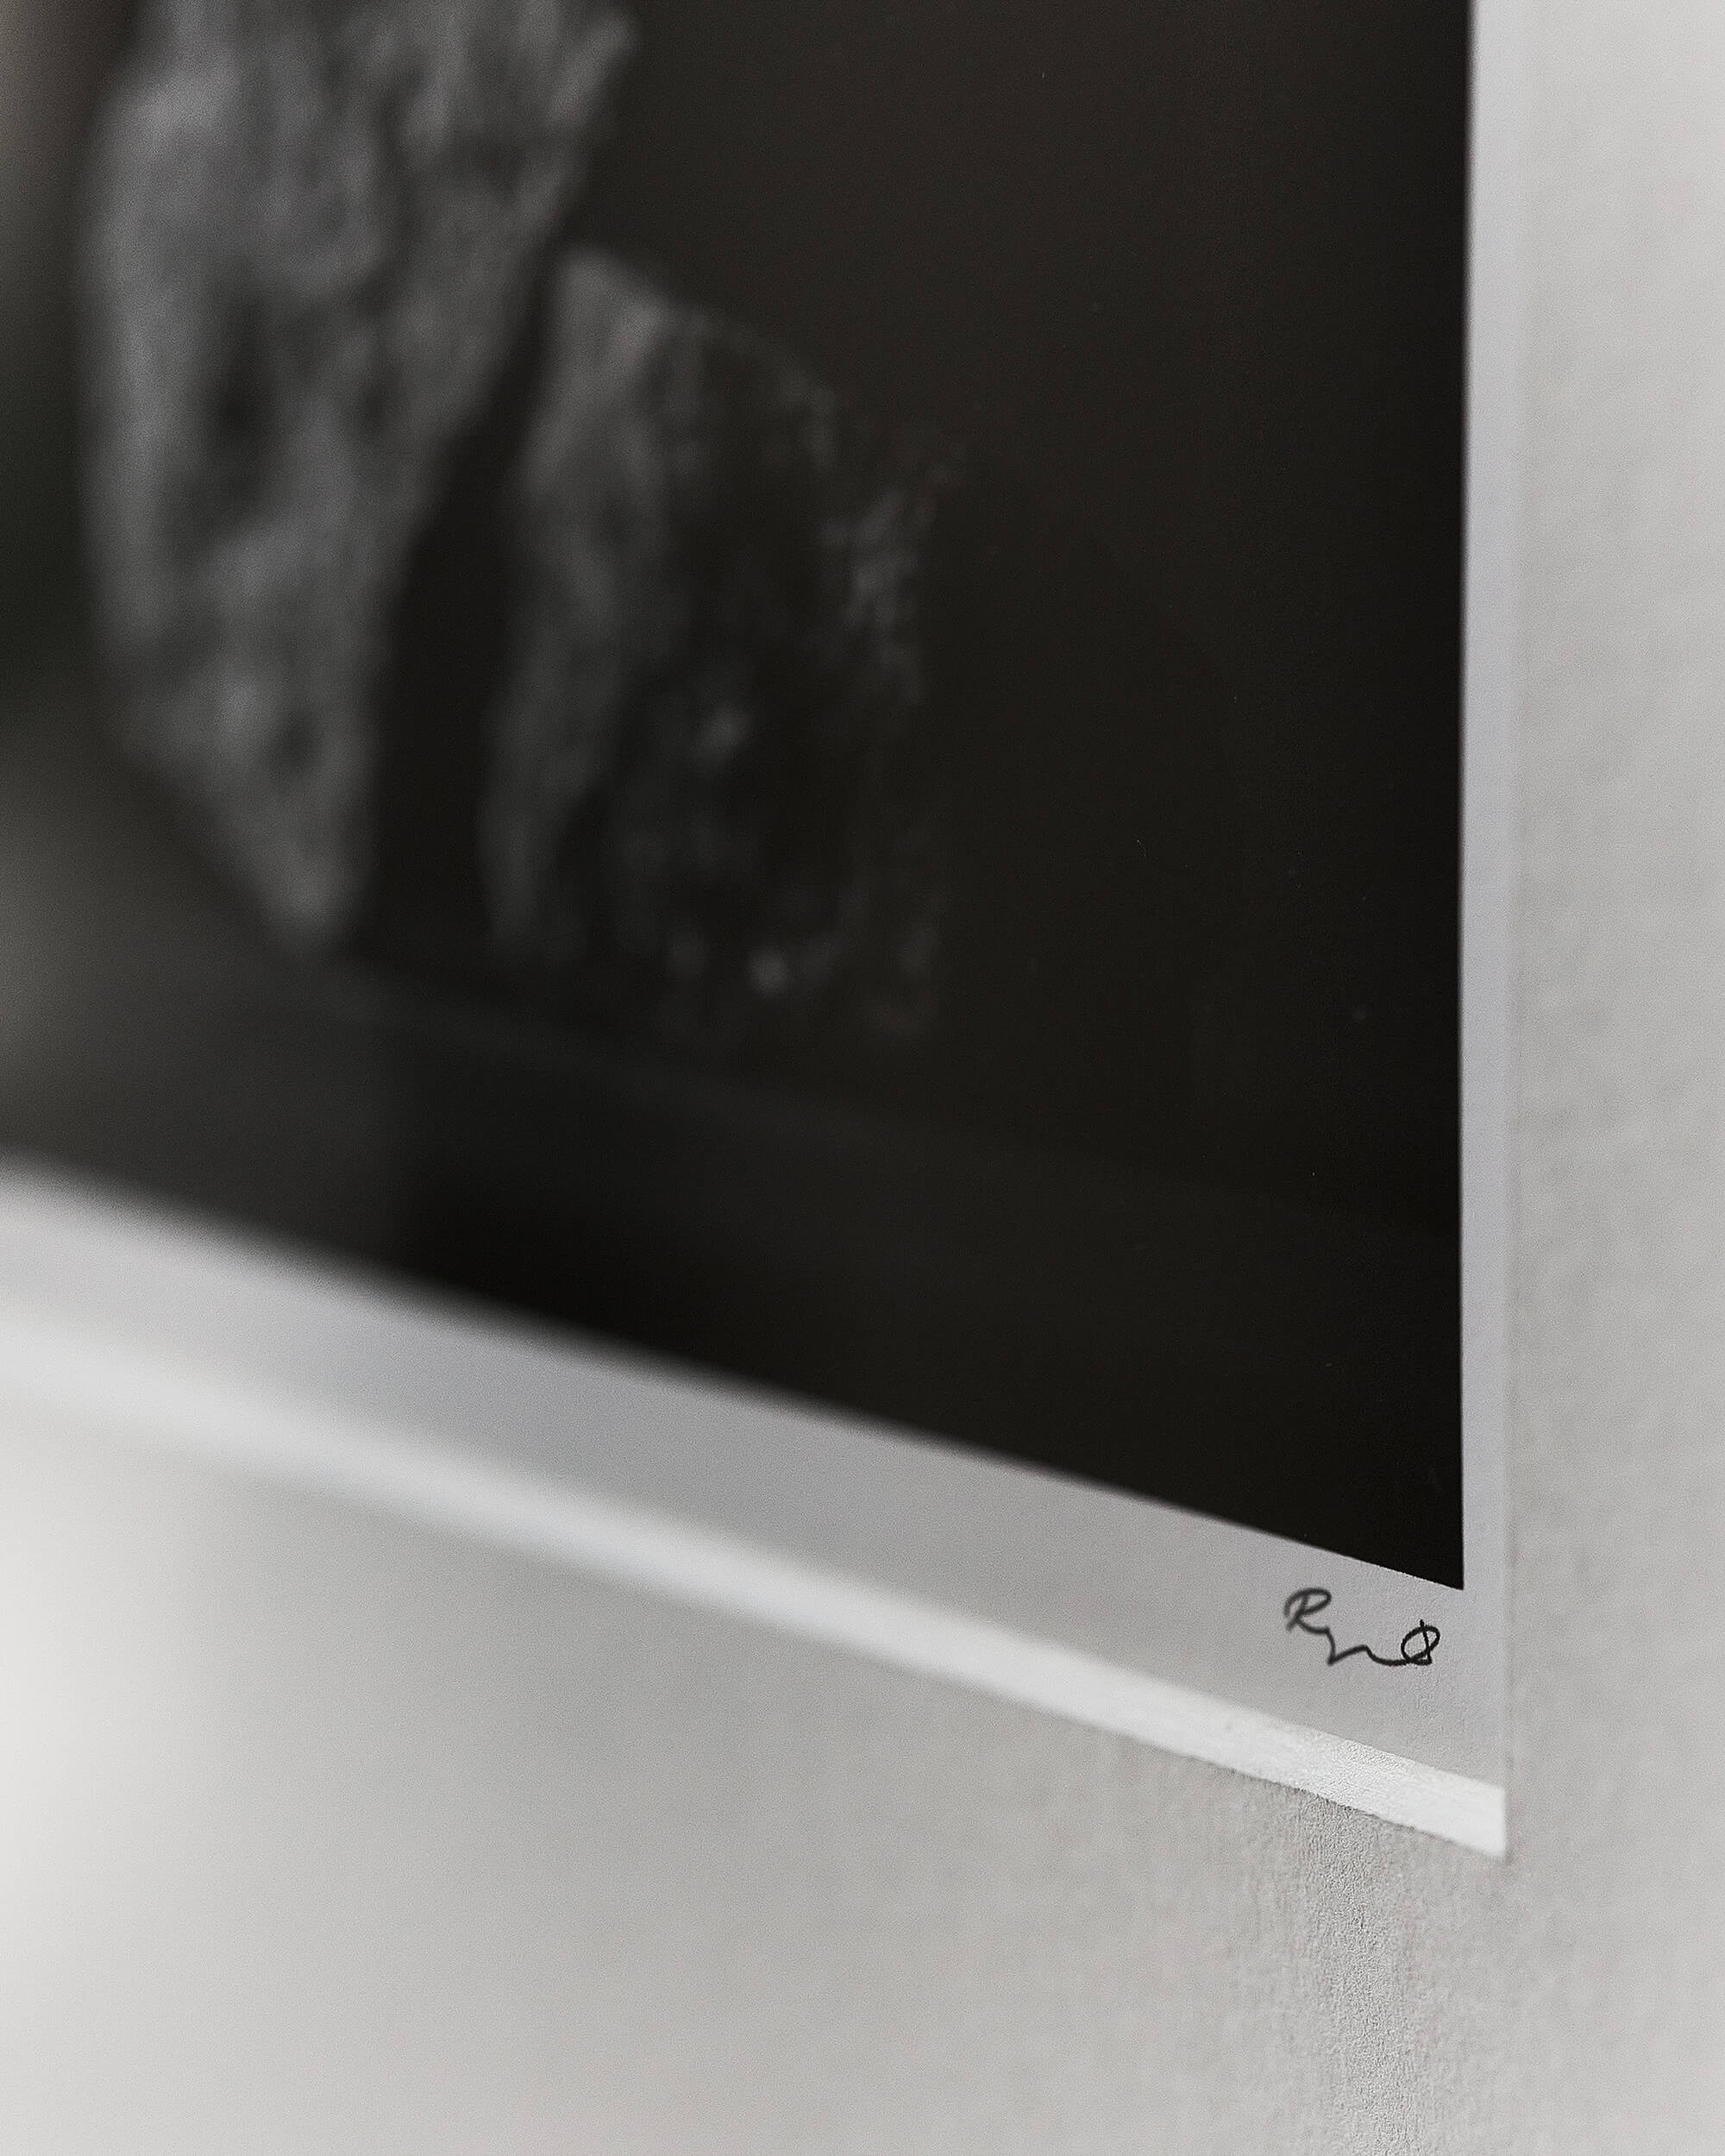 A close-up of a black and white art print with a signature, mounted on a passepartout